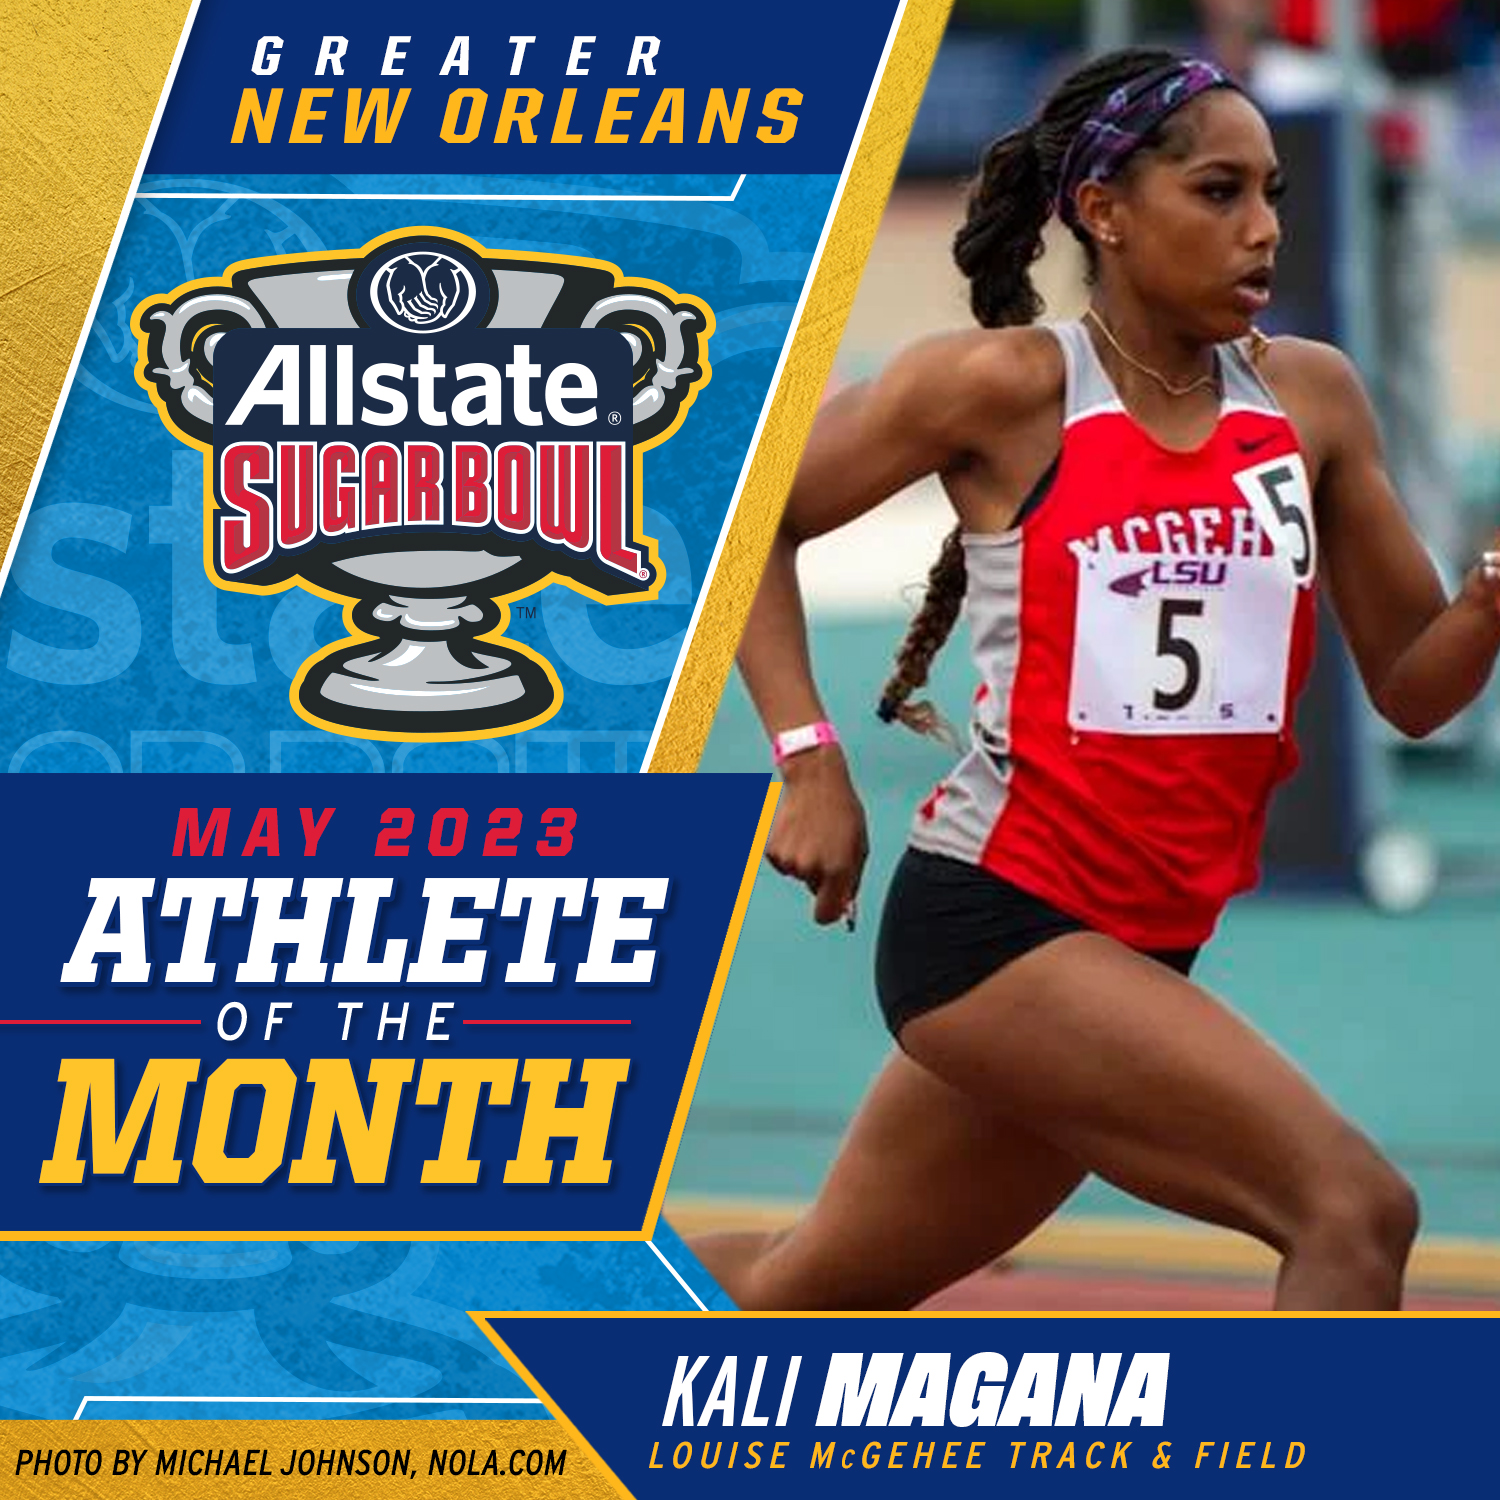 Greater New Orleans Amateur Athlete of the Month for May